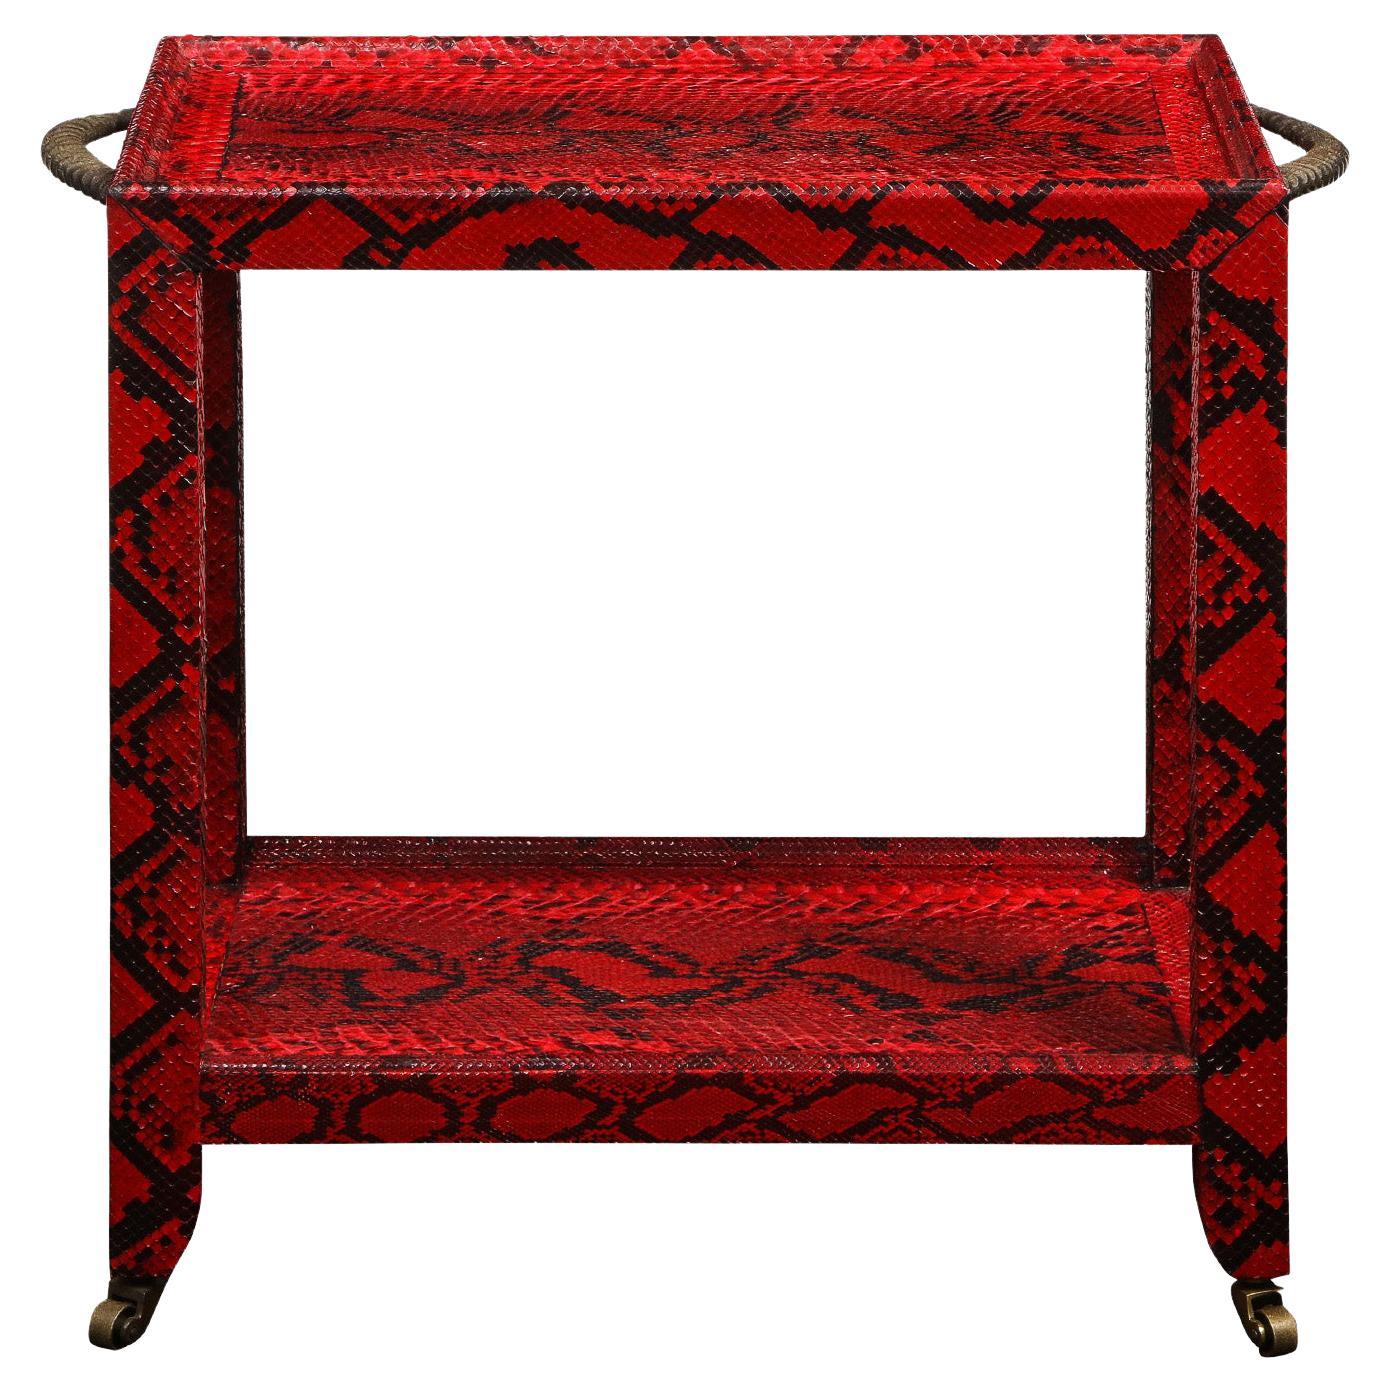 Karl Springer 2-Tier Side Table in Red Python with Horn Handles 1977, 'Signed' For Sale